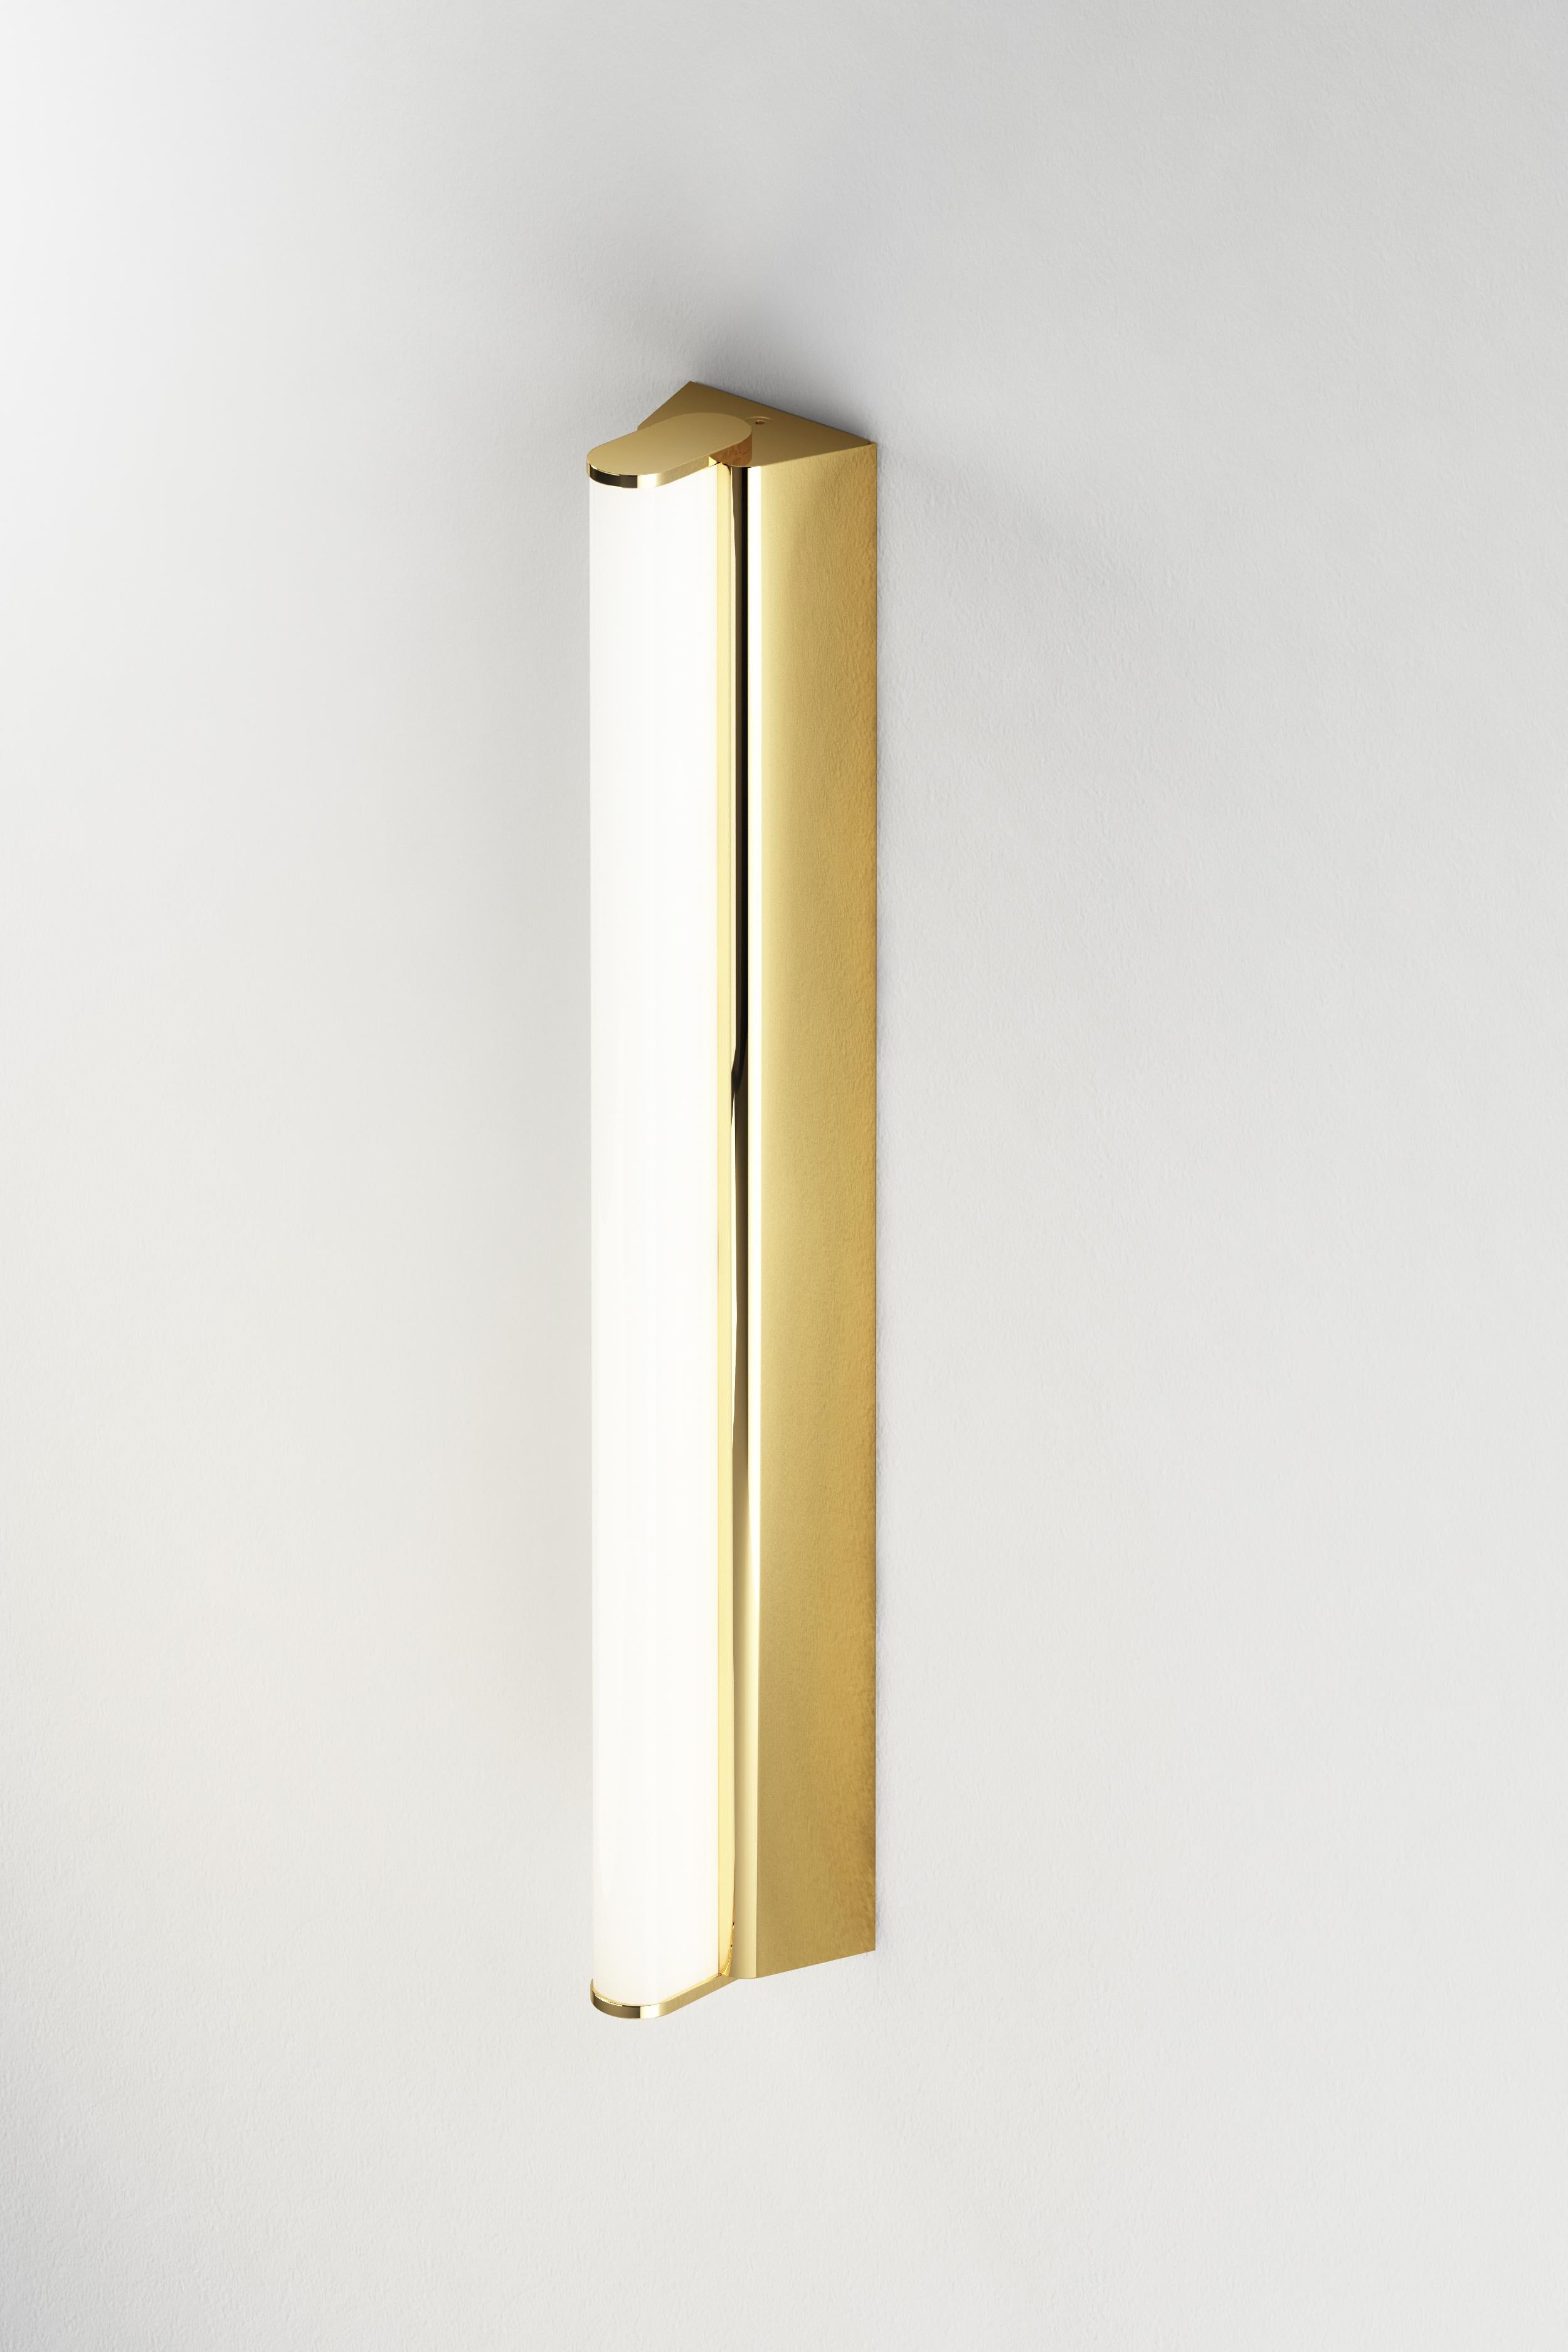 Post-Modern Ip Metrop 325 Polished Copper Wall Light by Emilie Cathelineau For Sale